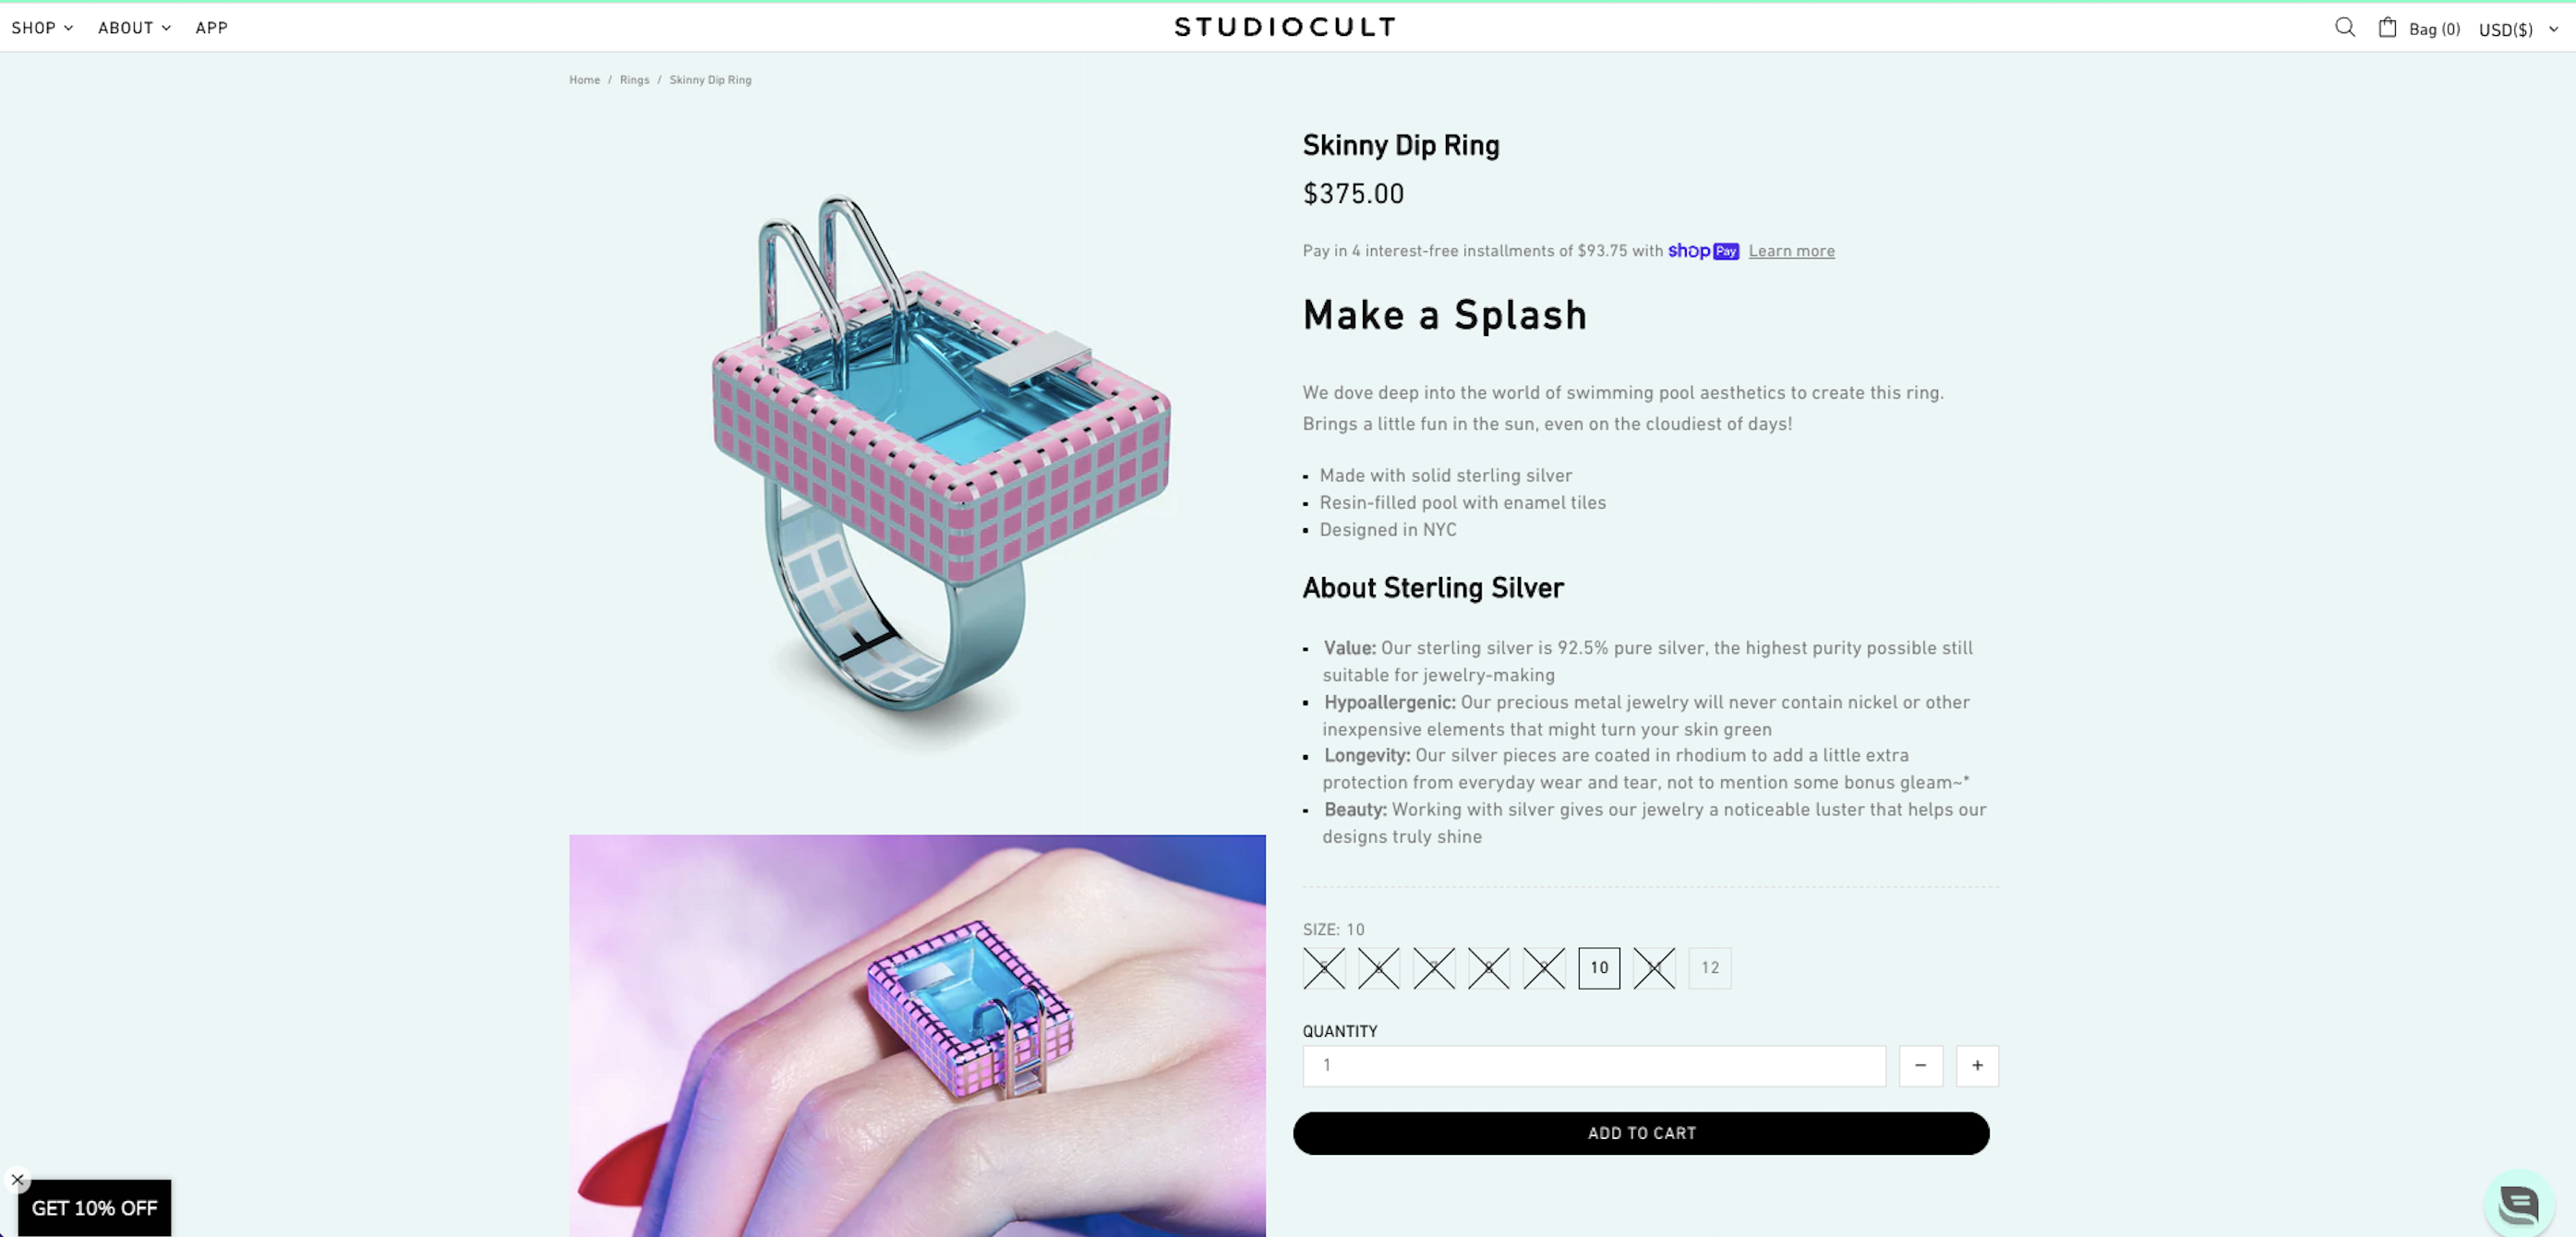 Studio Cult product page Skinny Dip Ring